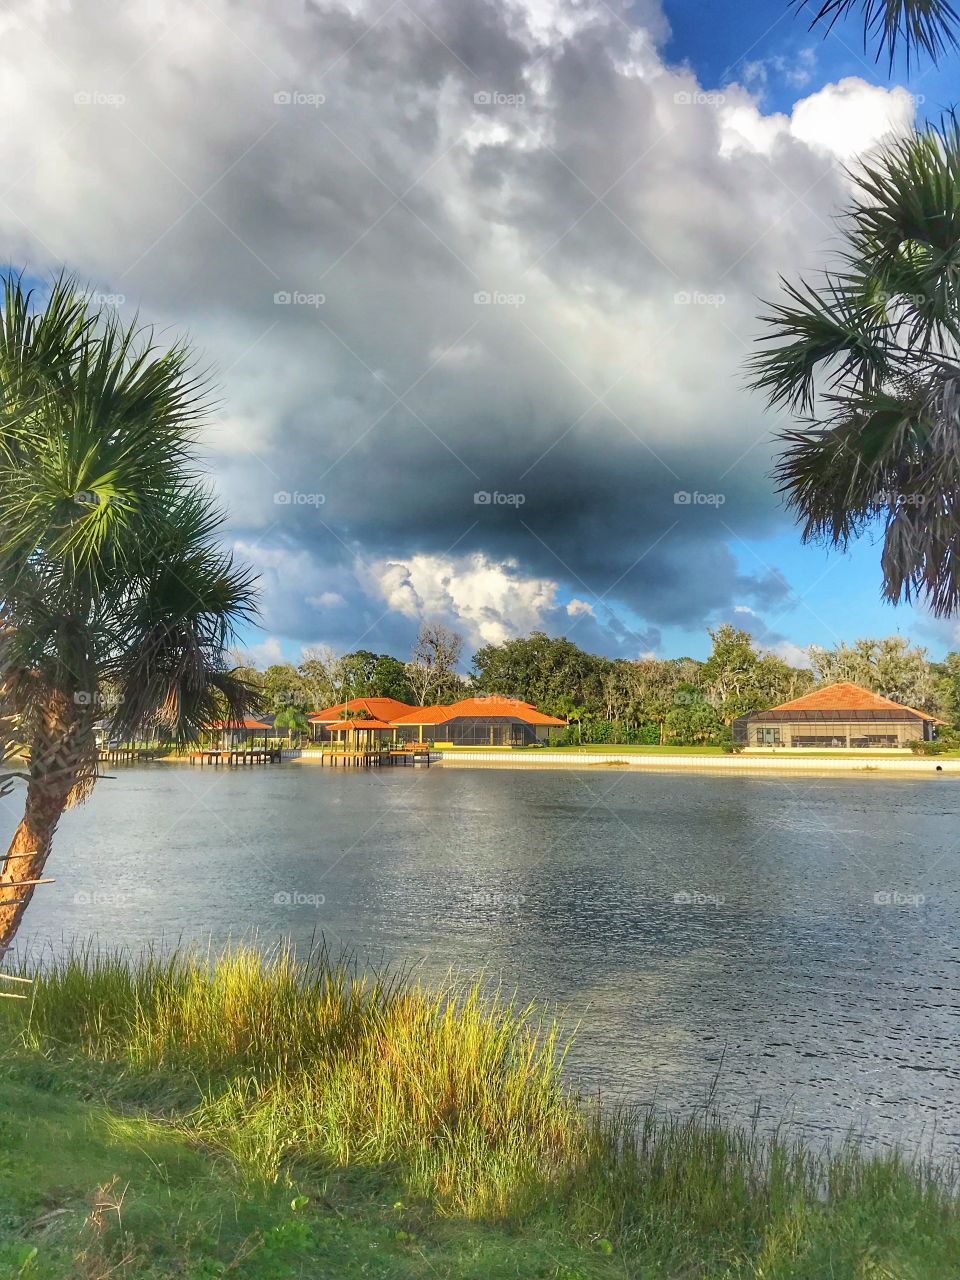 Stormy clouds over Intracoastal Waterway 